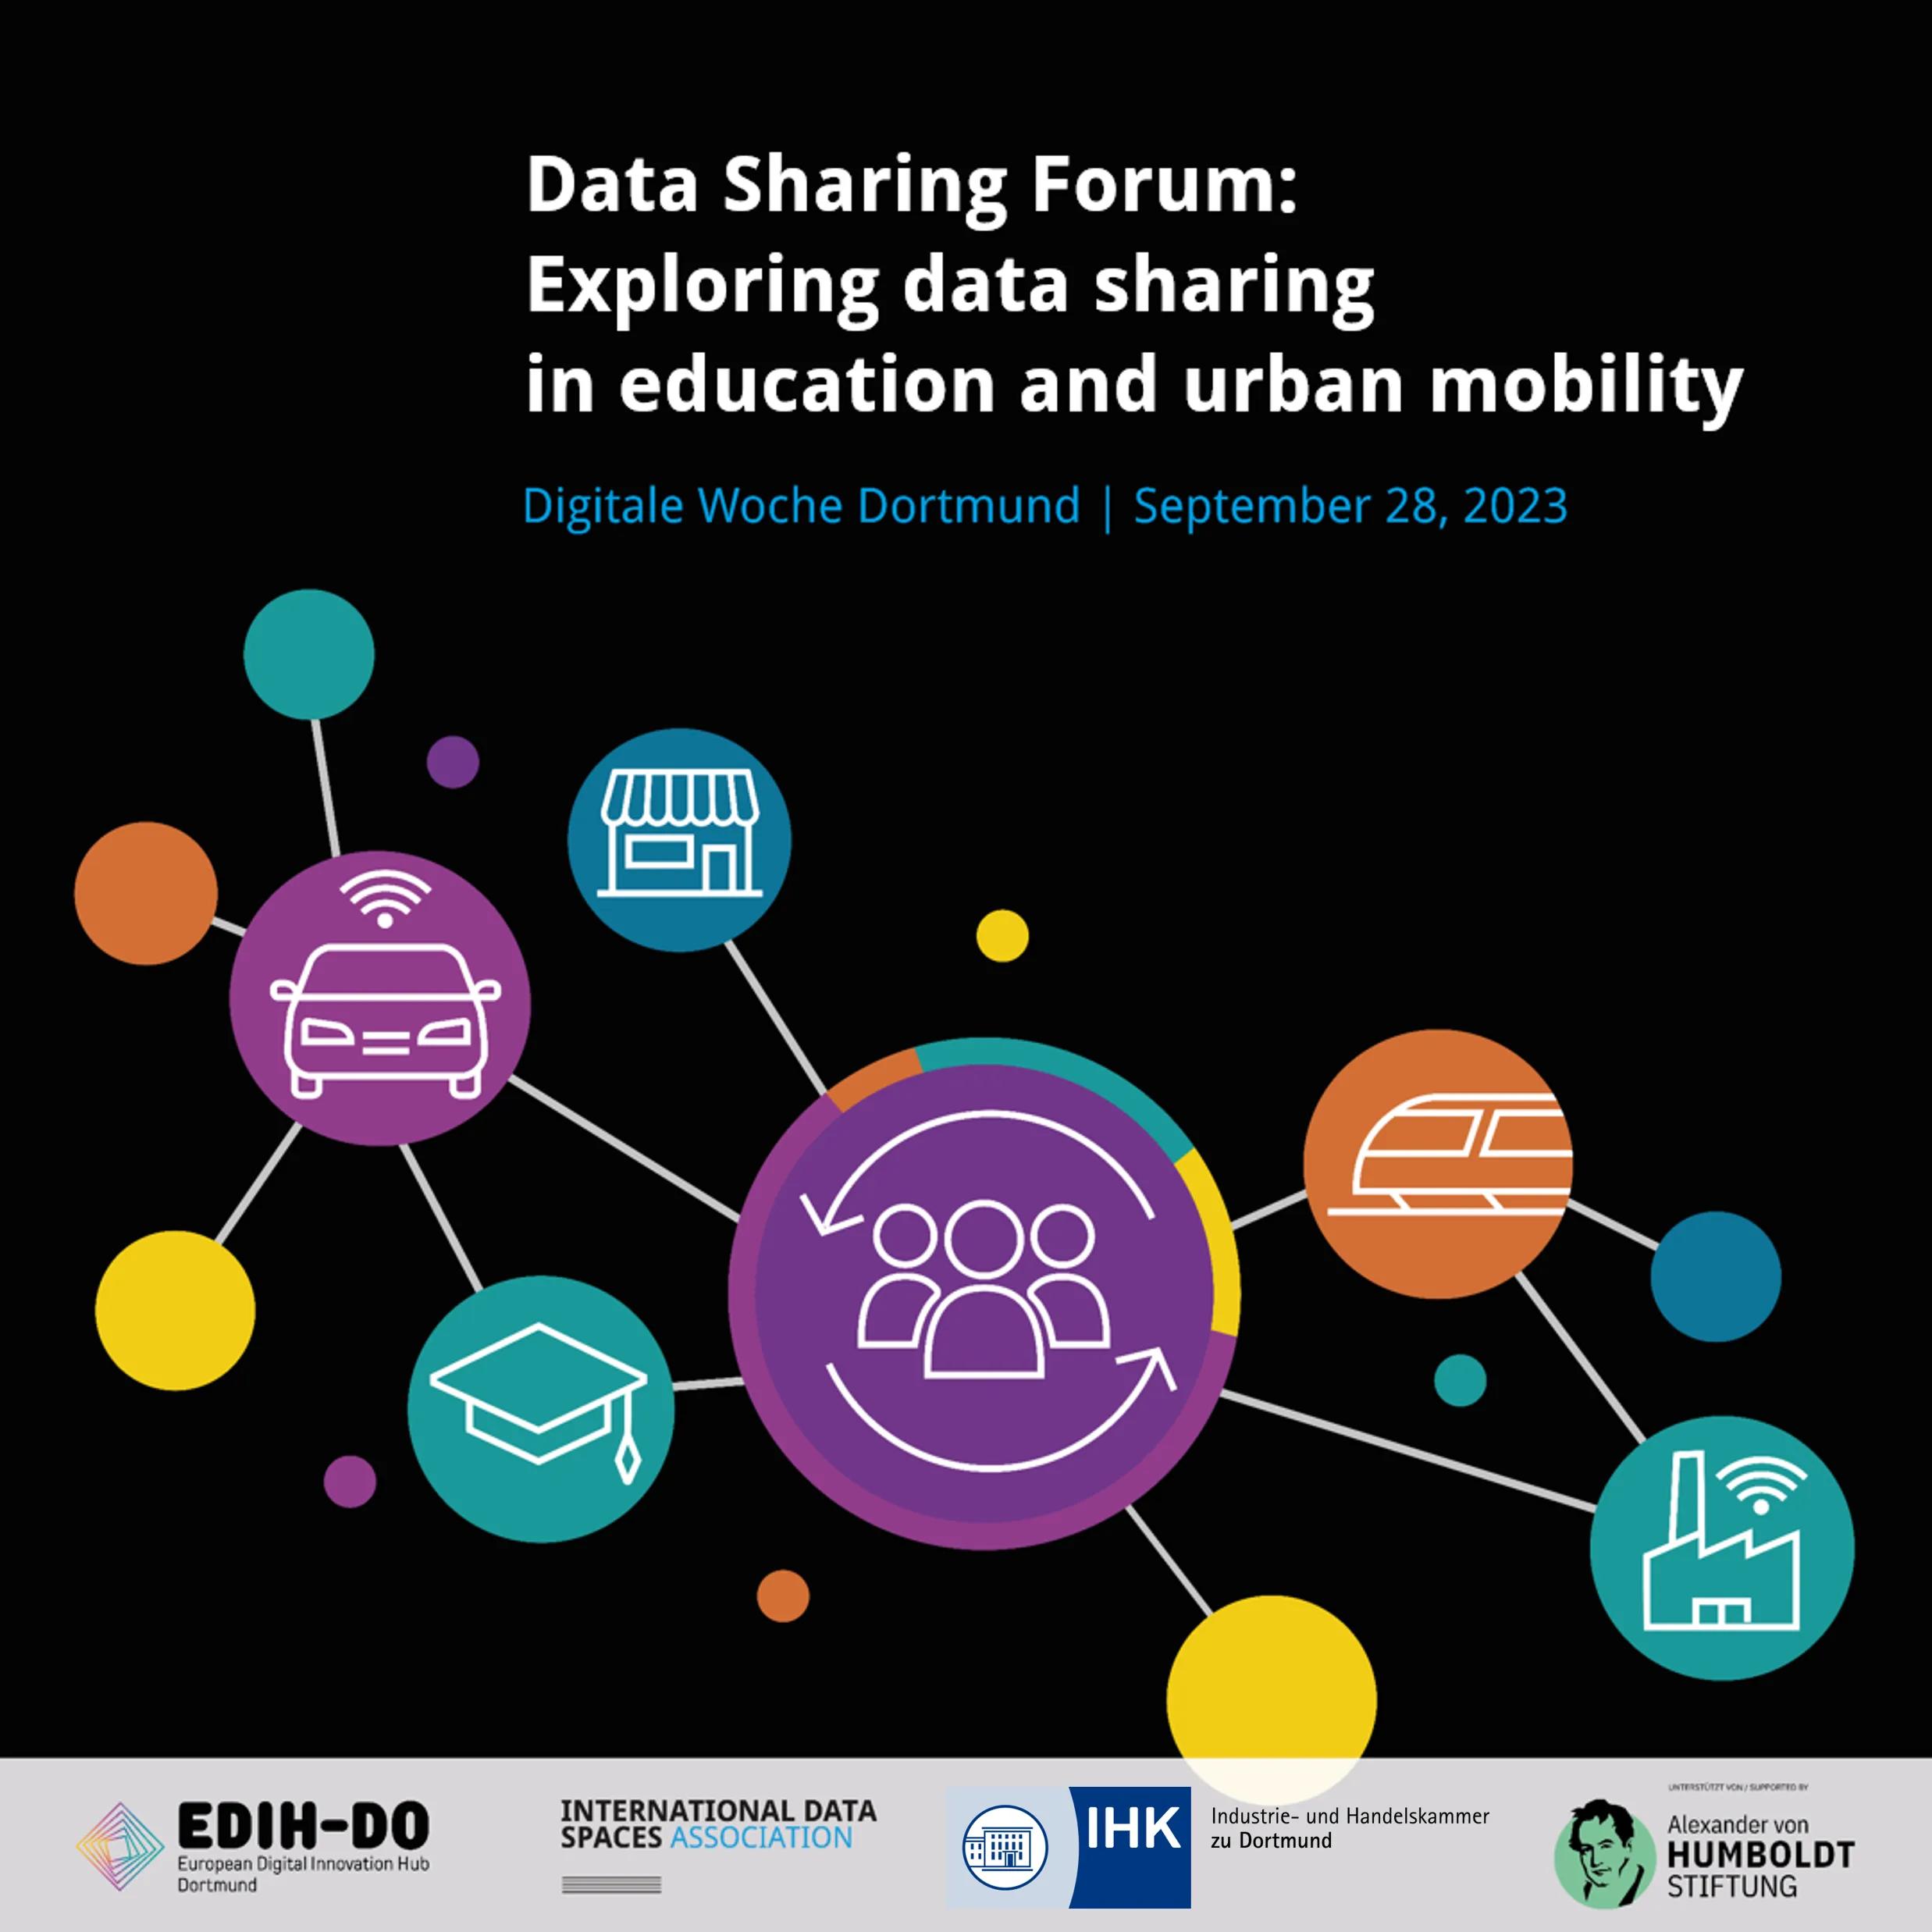 Data Sharing Forum: Exploring data sharing in education and urban mobility